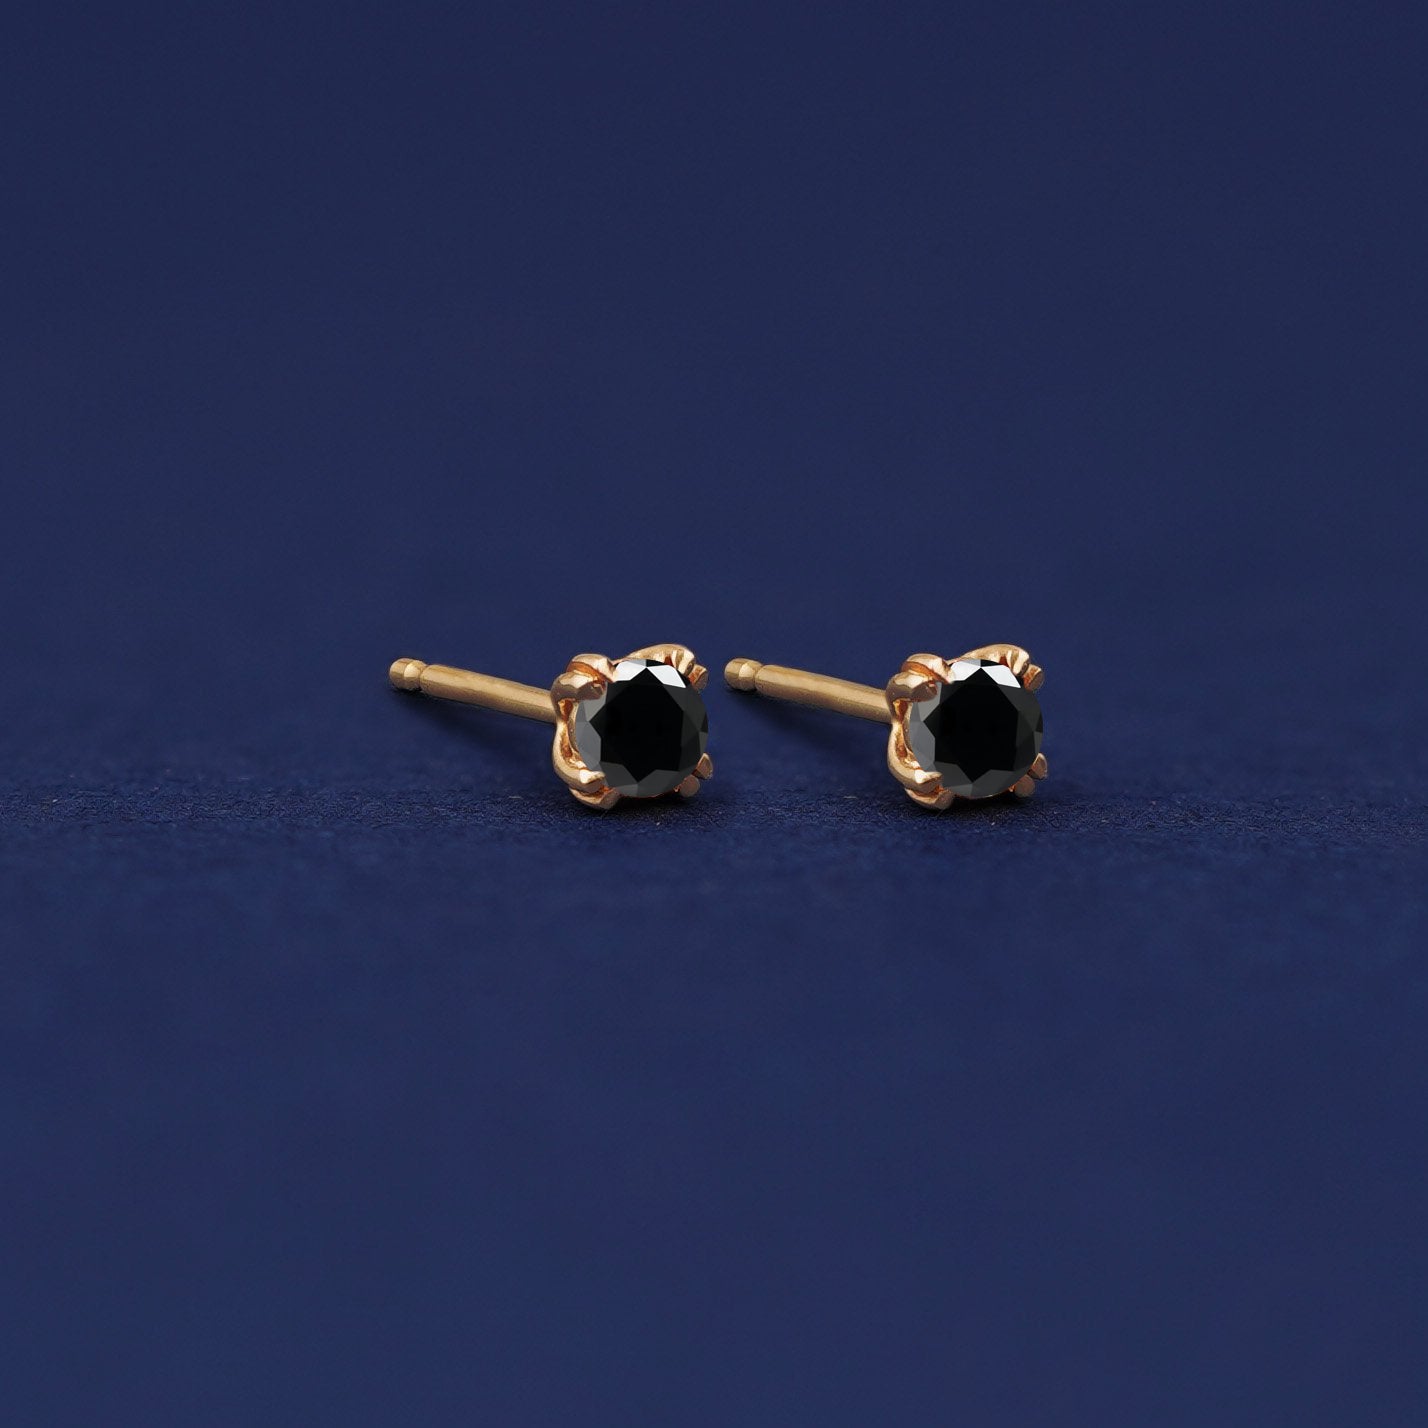 Yellow gold Black Diamond Earrings shown with 14k solid gold pushback post with no backings